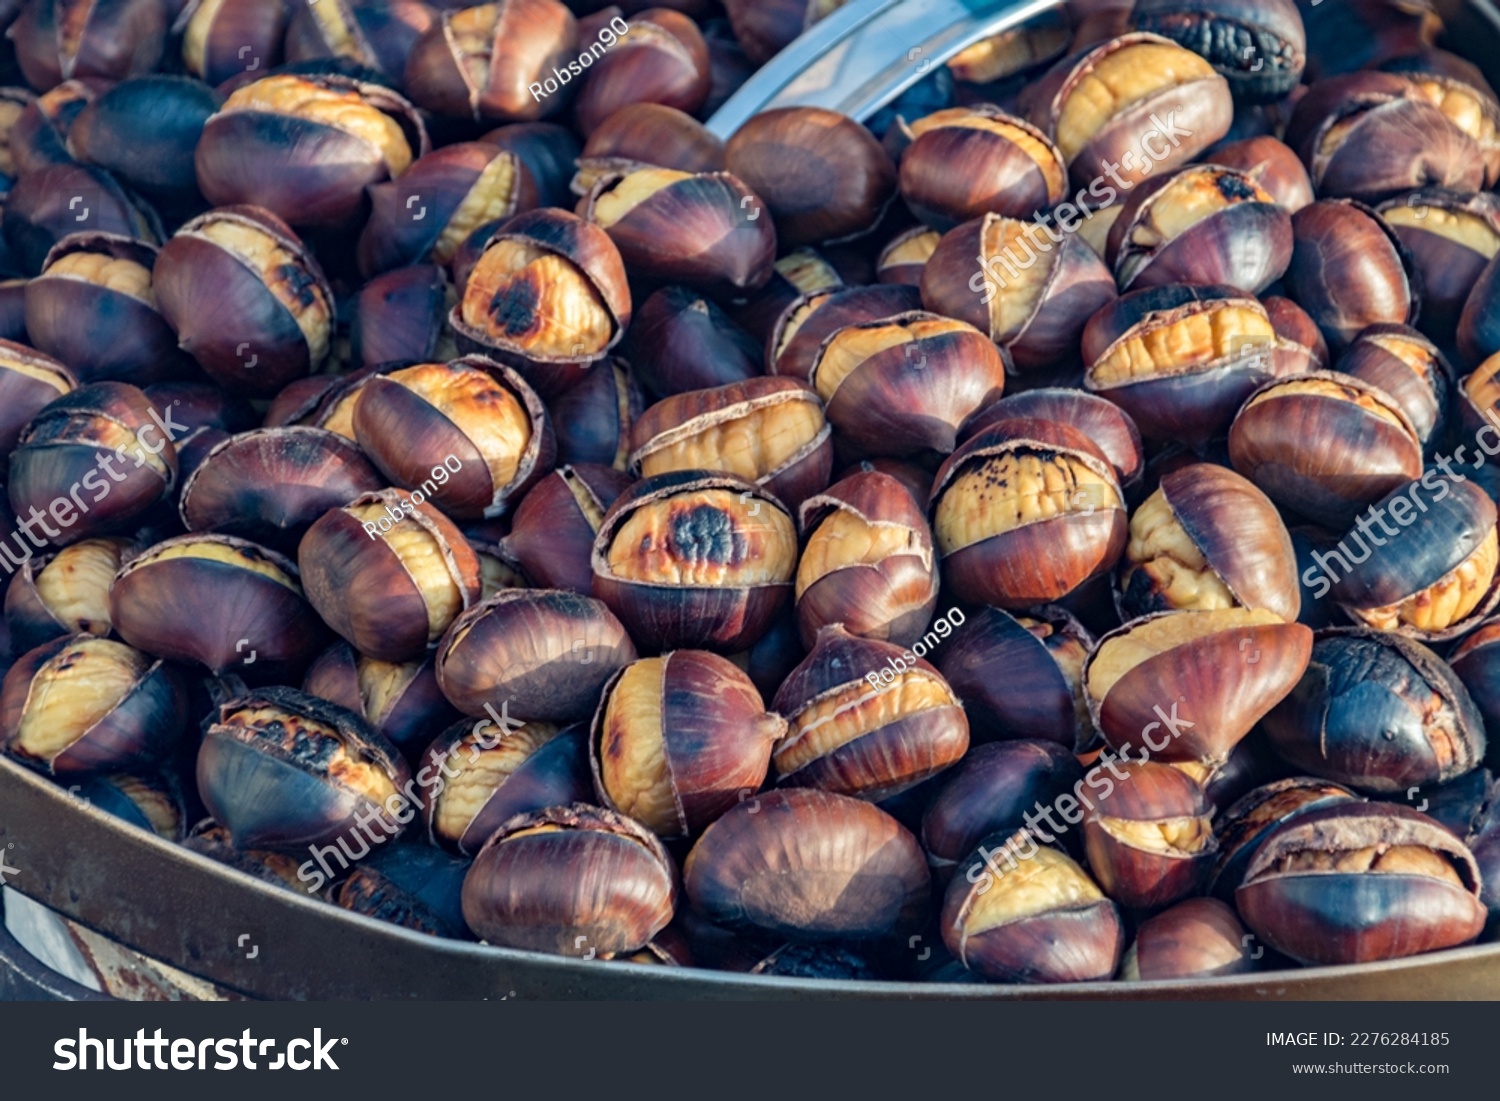 Eat roasted chestnuts. Roasted chestnuts for sale. #2276284185